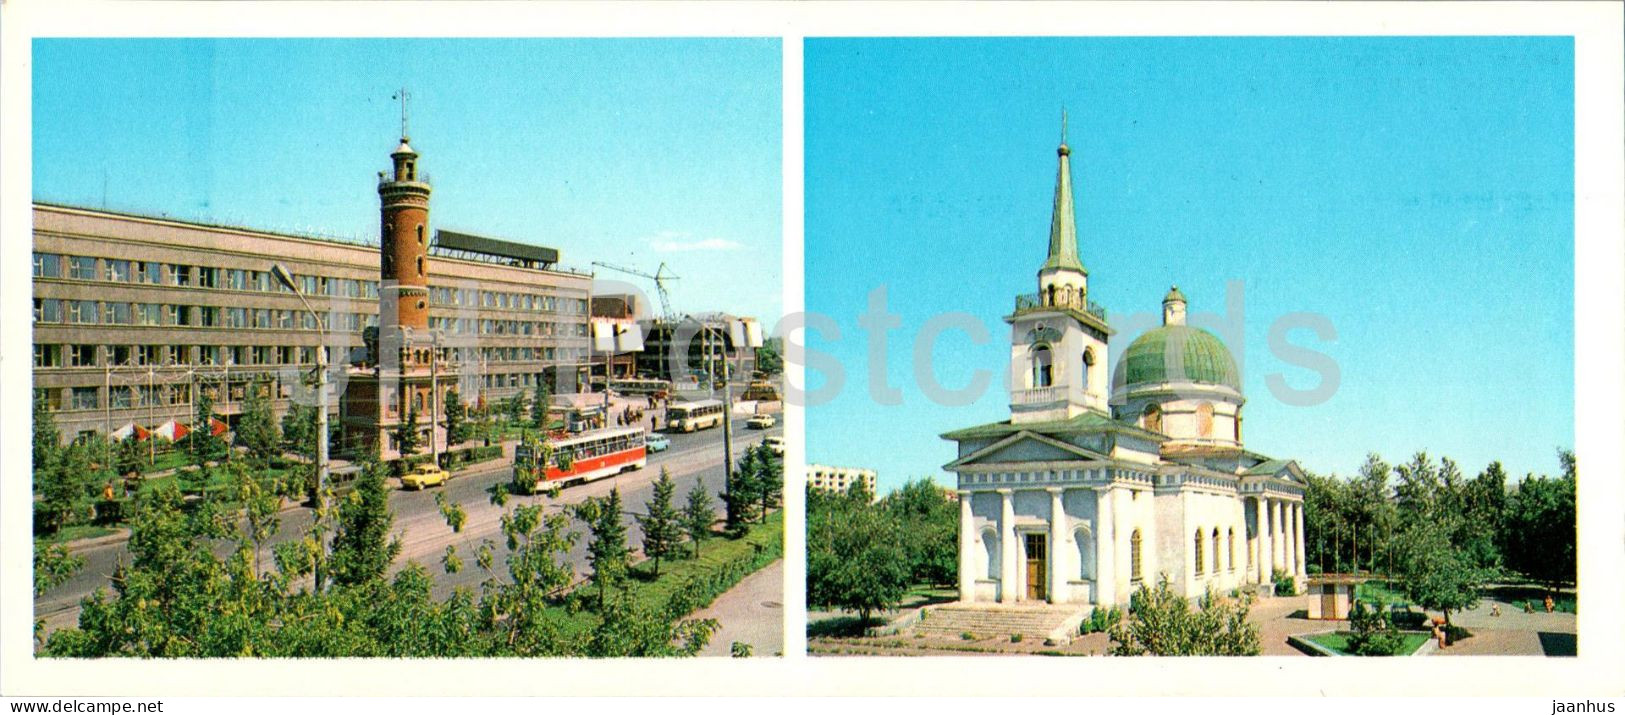 Omsk - Main Post Office - Nikolsky Cathedral - Tram - 1982 - Russia USSR - Unused - Russland